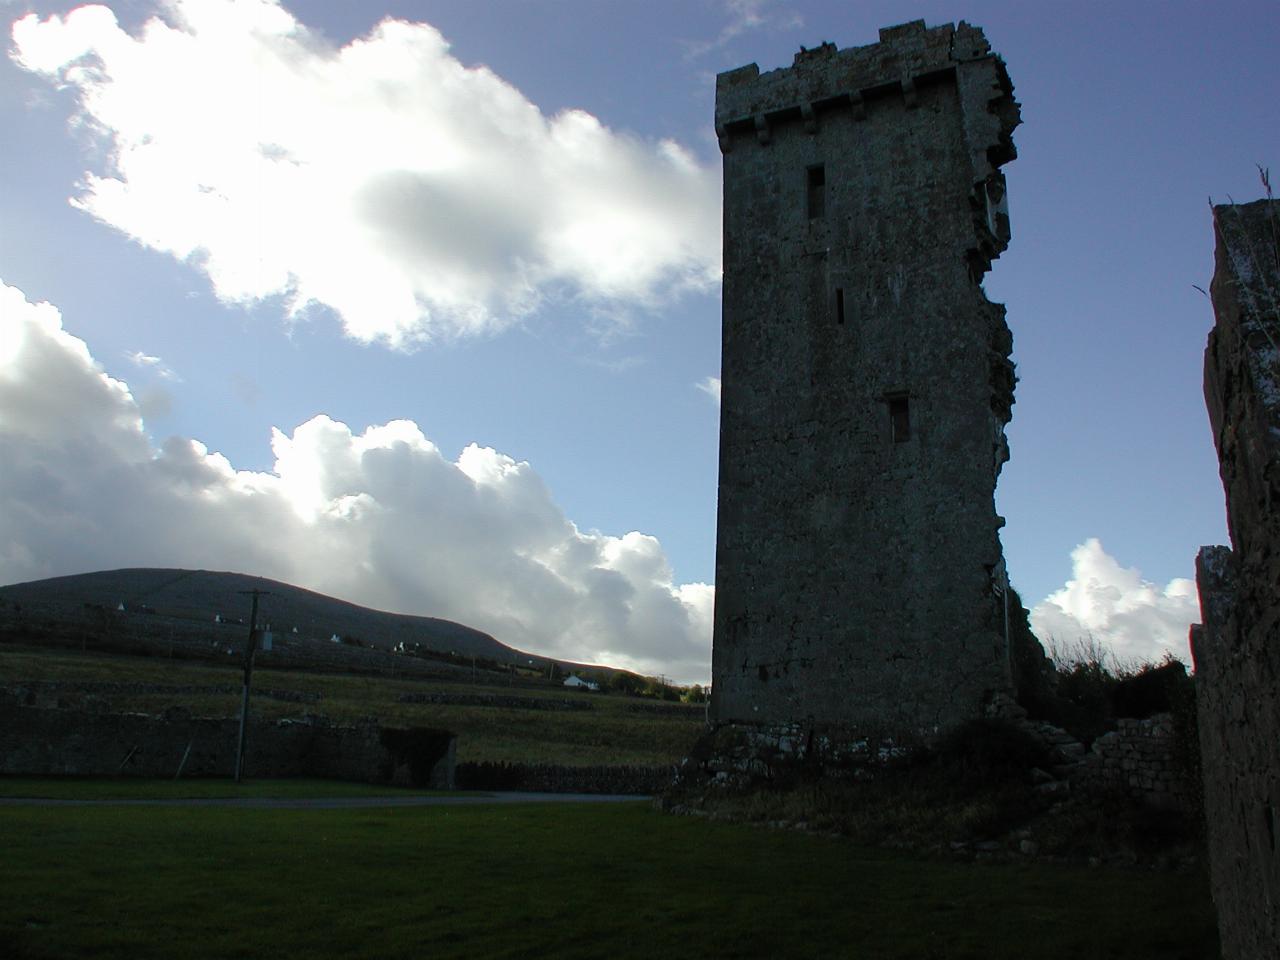 Near Ballyvaughn with ruins, The Burren and general view